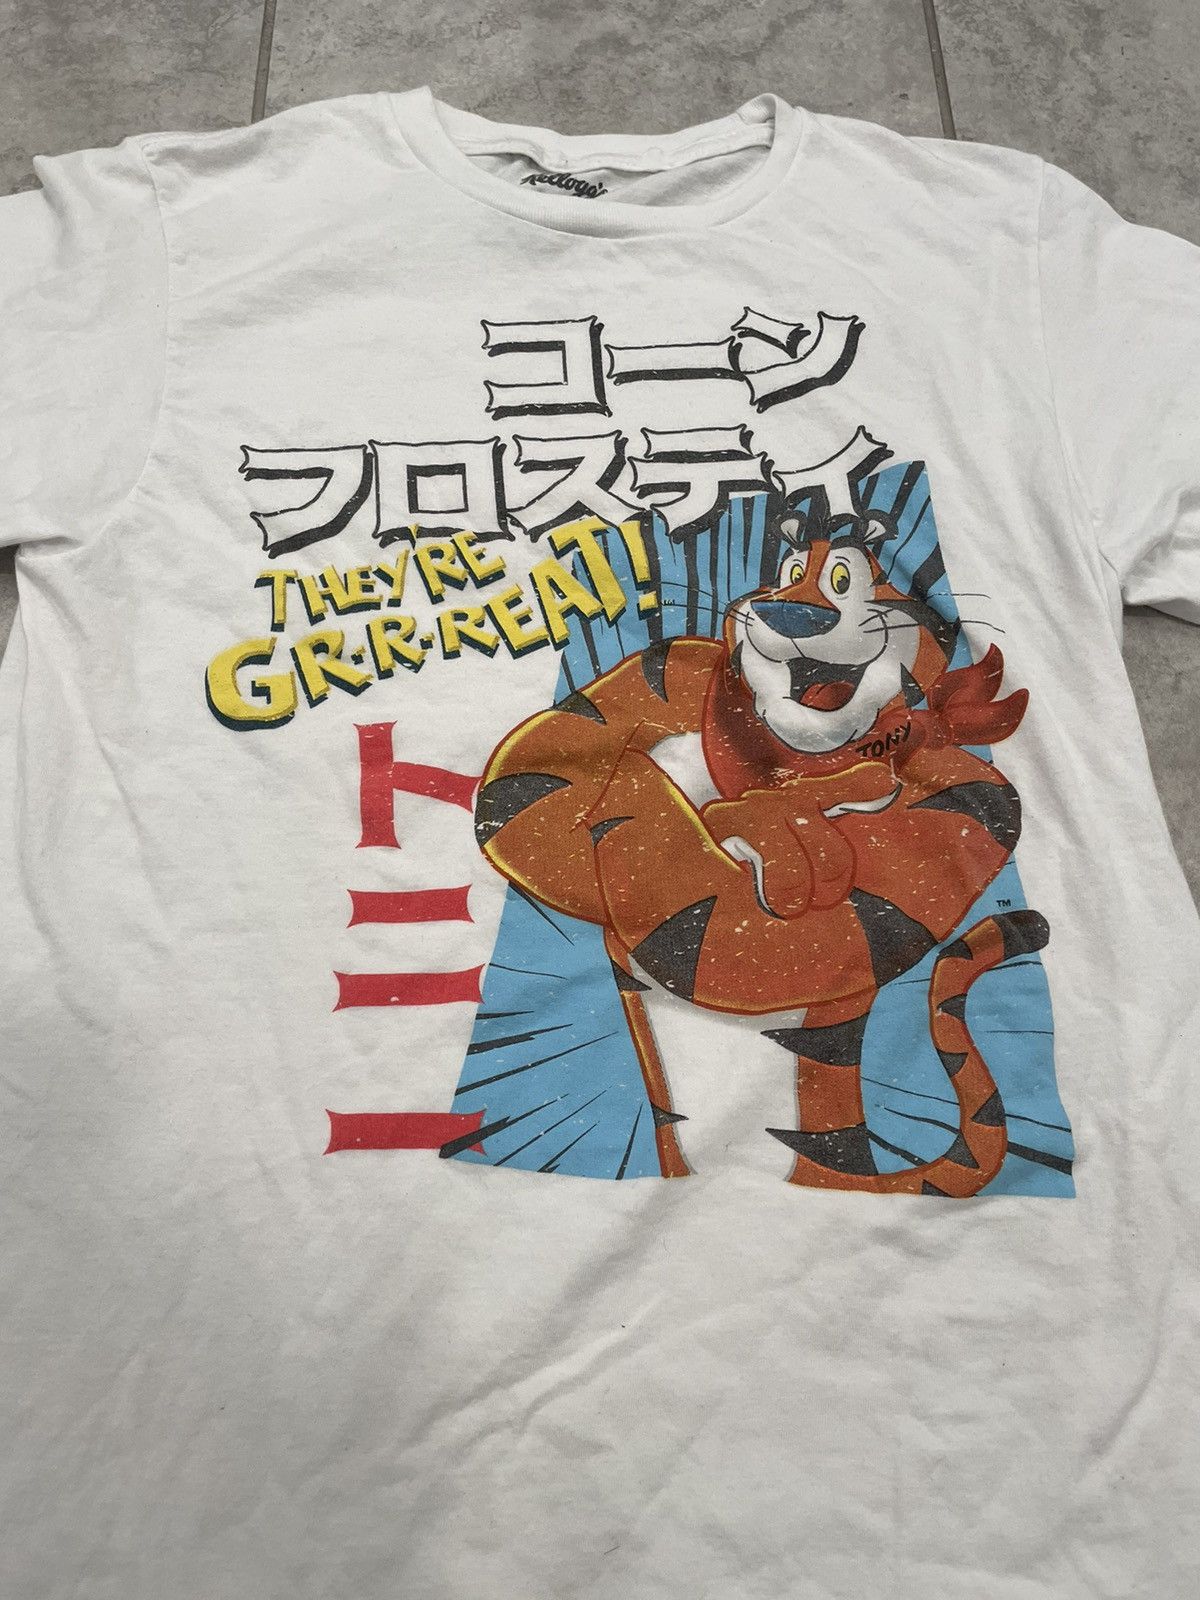 Vintage Kellogg’s “Japanese Frosted Flakes” Tee Size US S / EU 44-46 / 1 - 2 Preview